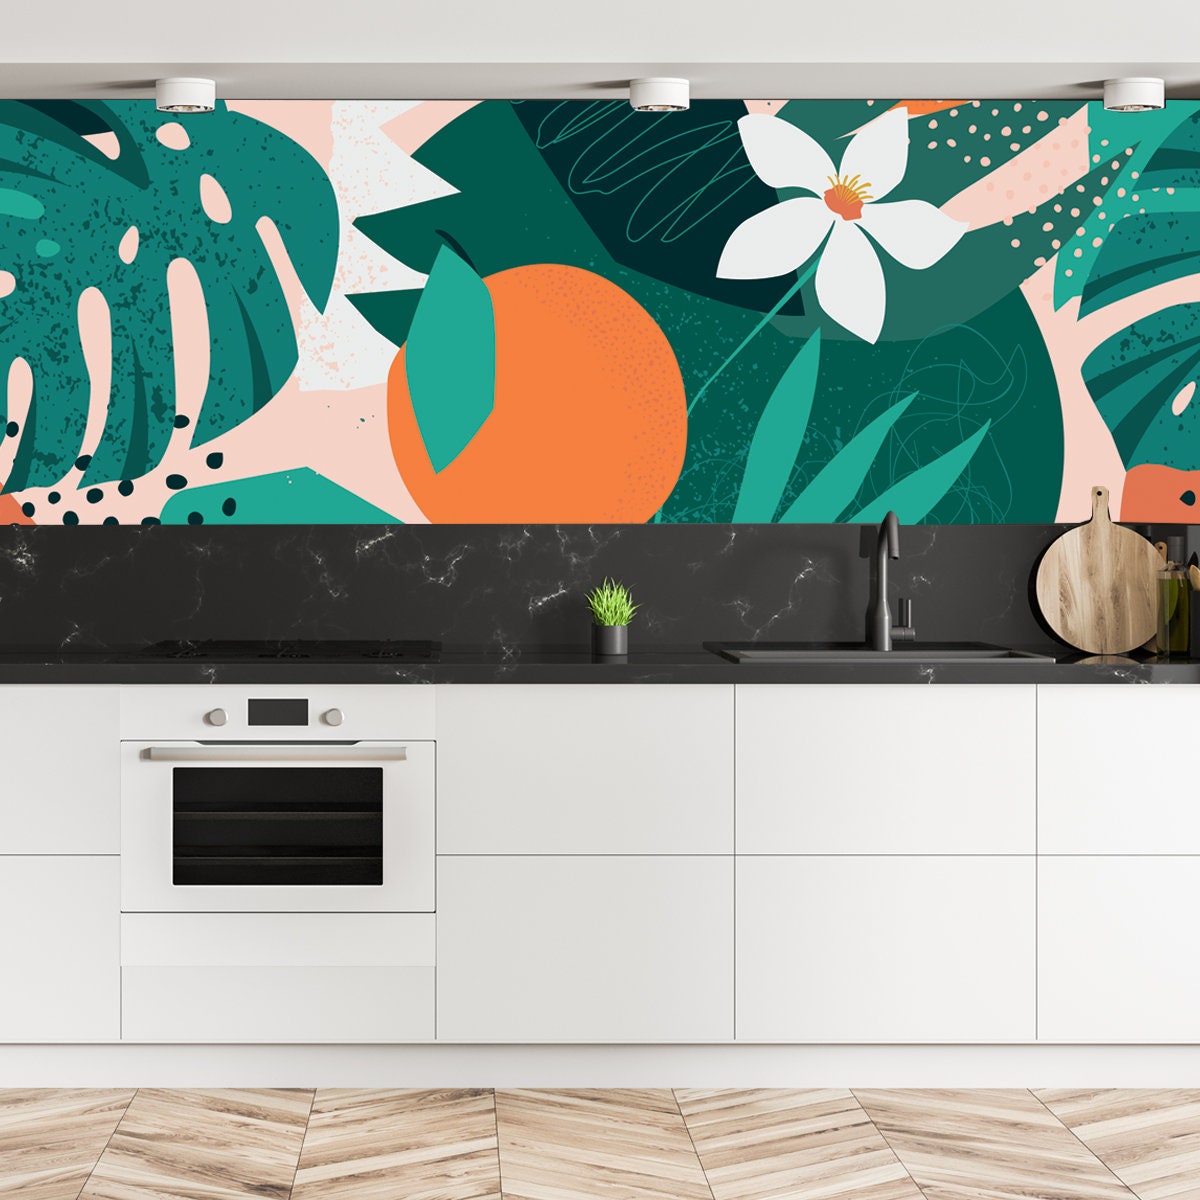 Collage Contemporary Floral Seamless Pattern. Modern Exotic Jungle Fruits and Plants Wallpaper Kitchen Mural